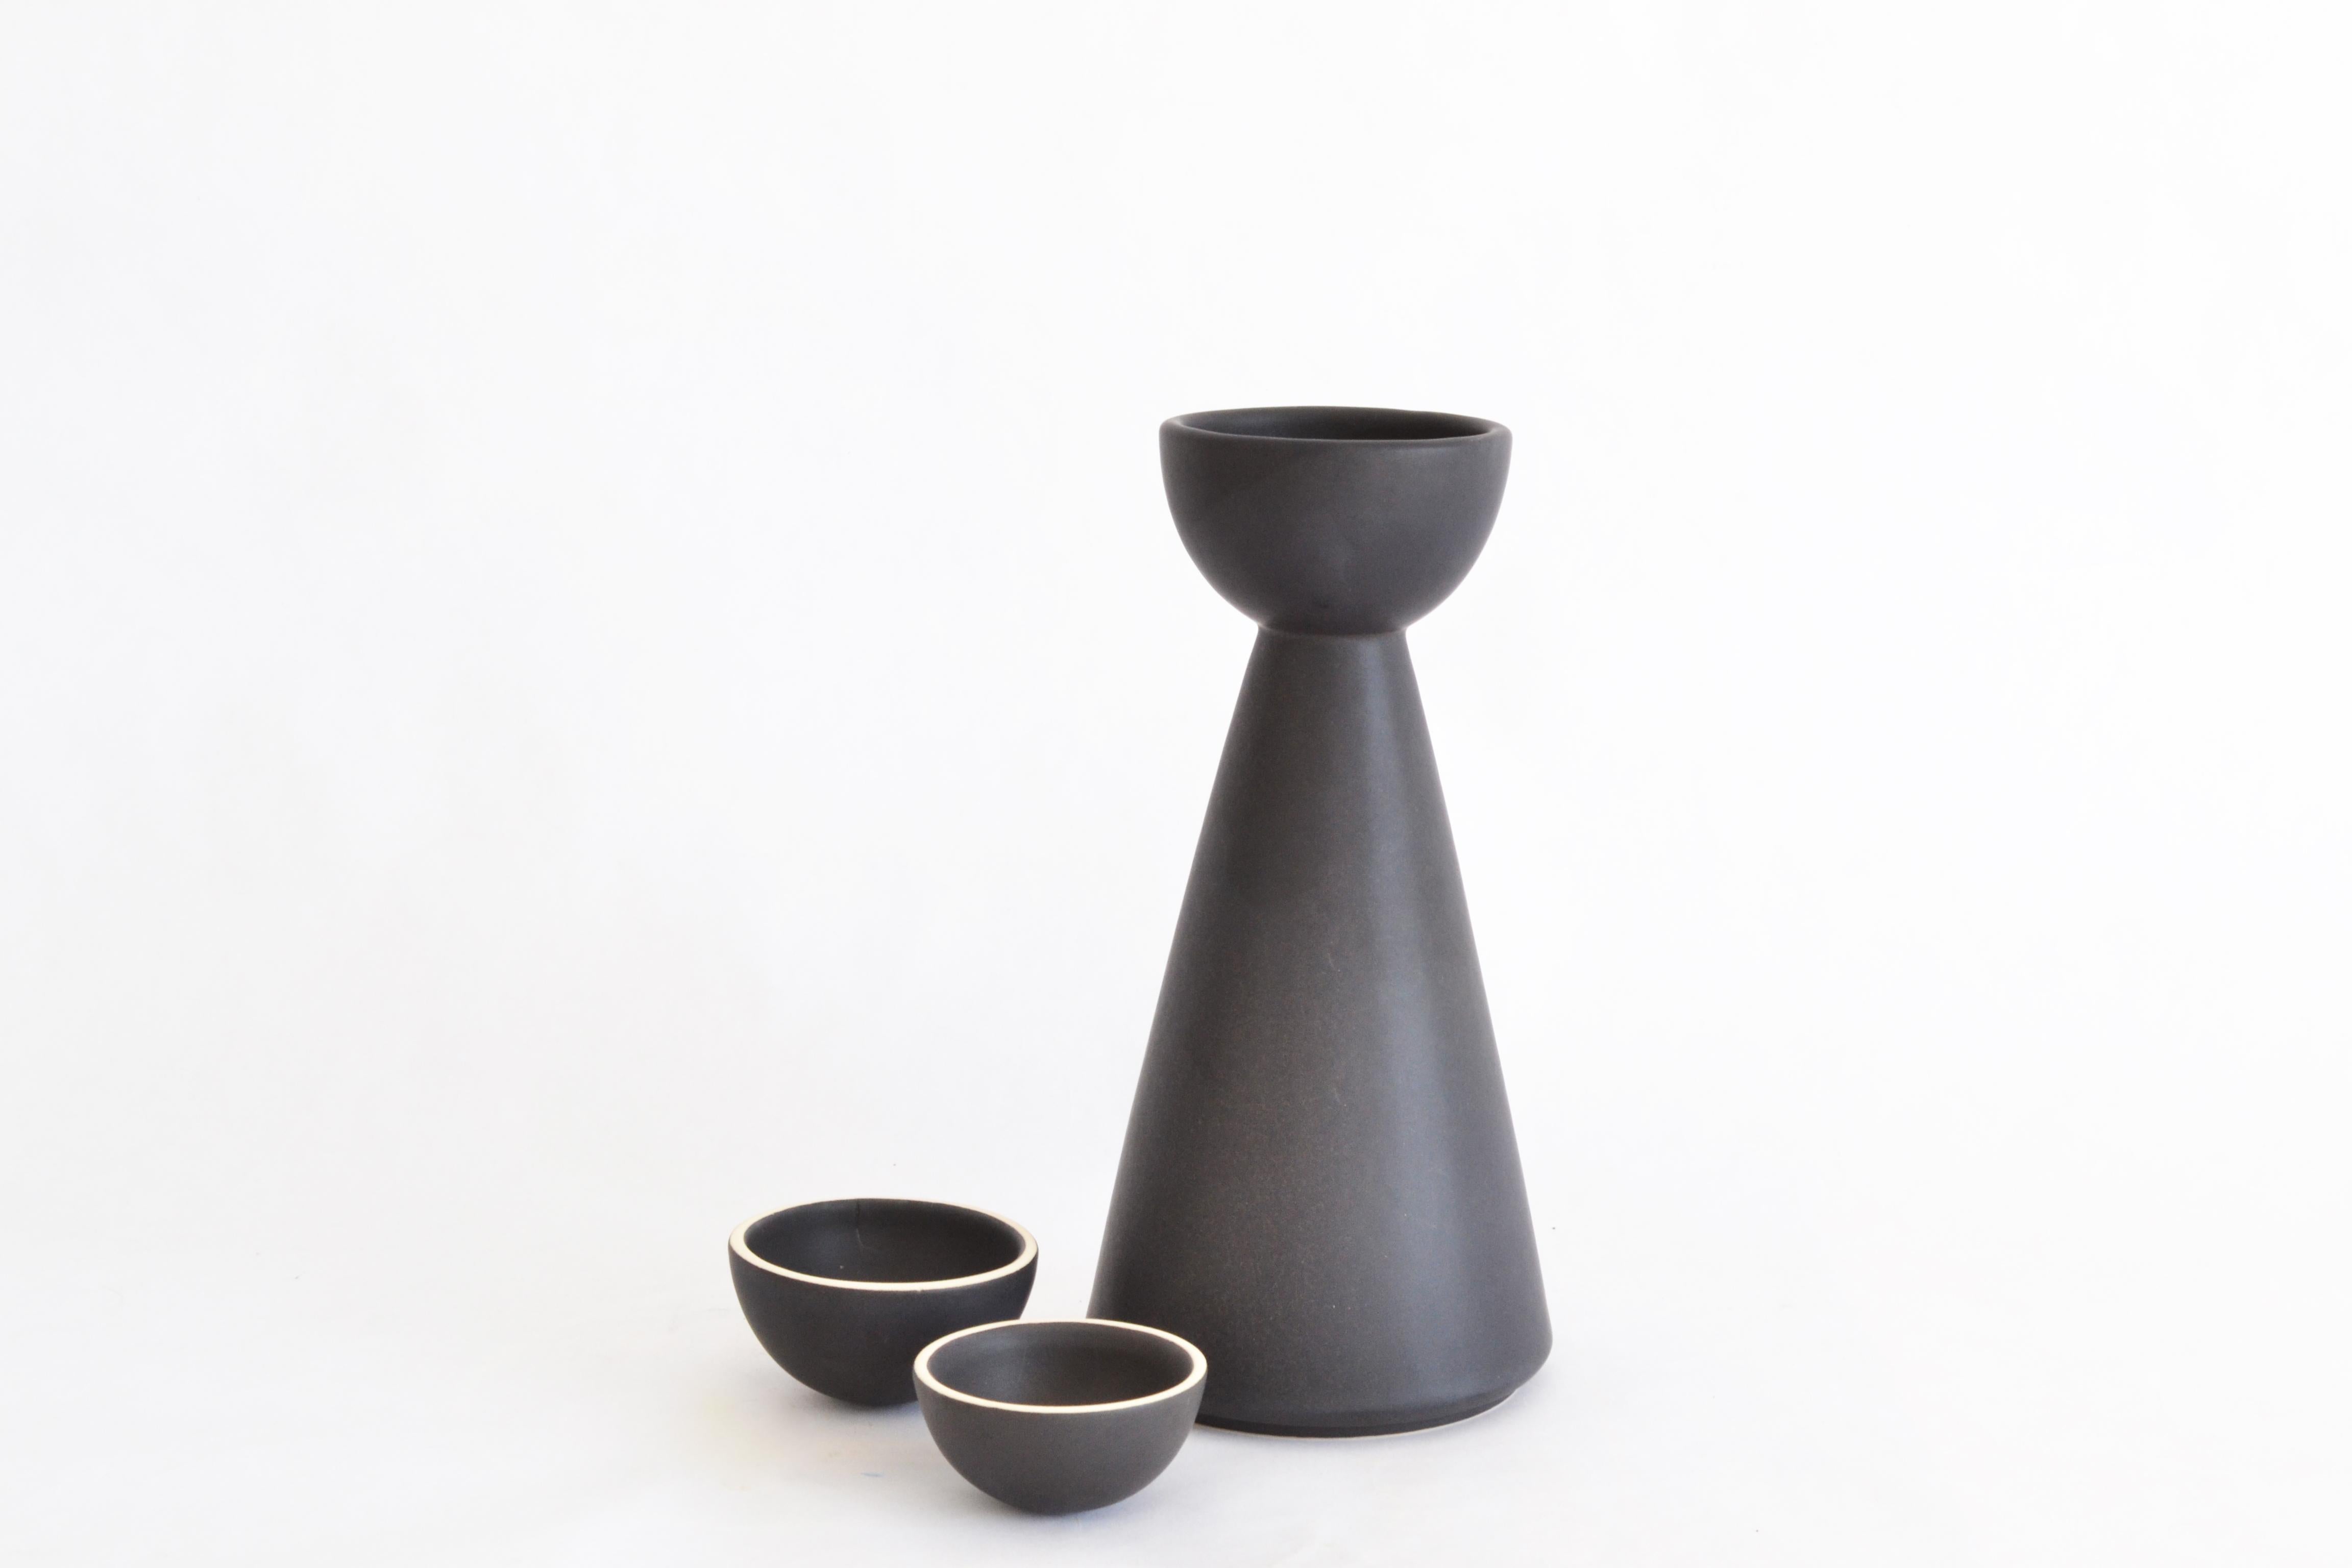 BLACK Carafe Contemporary Inspired by Traditional Jug Pitcher for Mezcal en vente 2